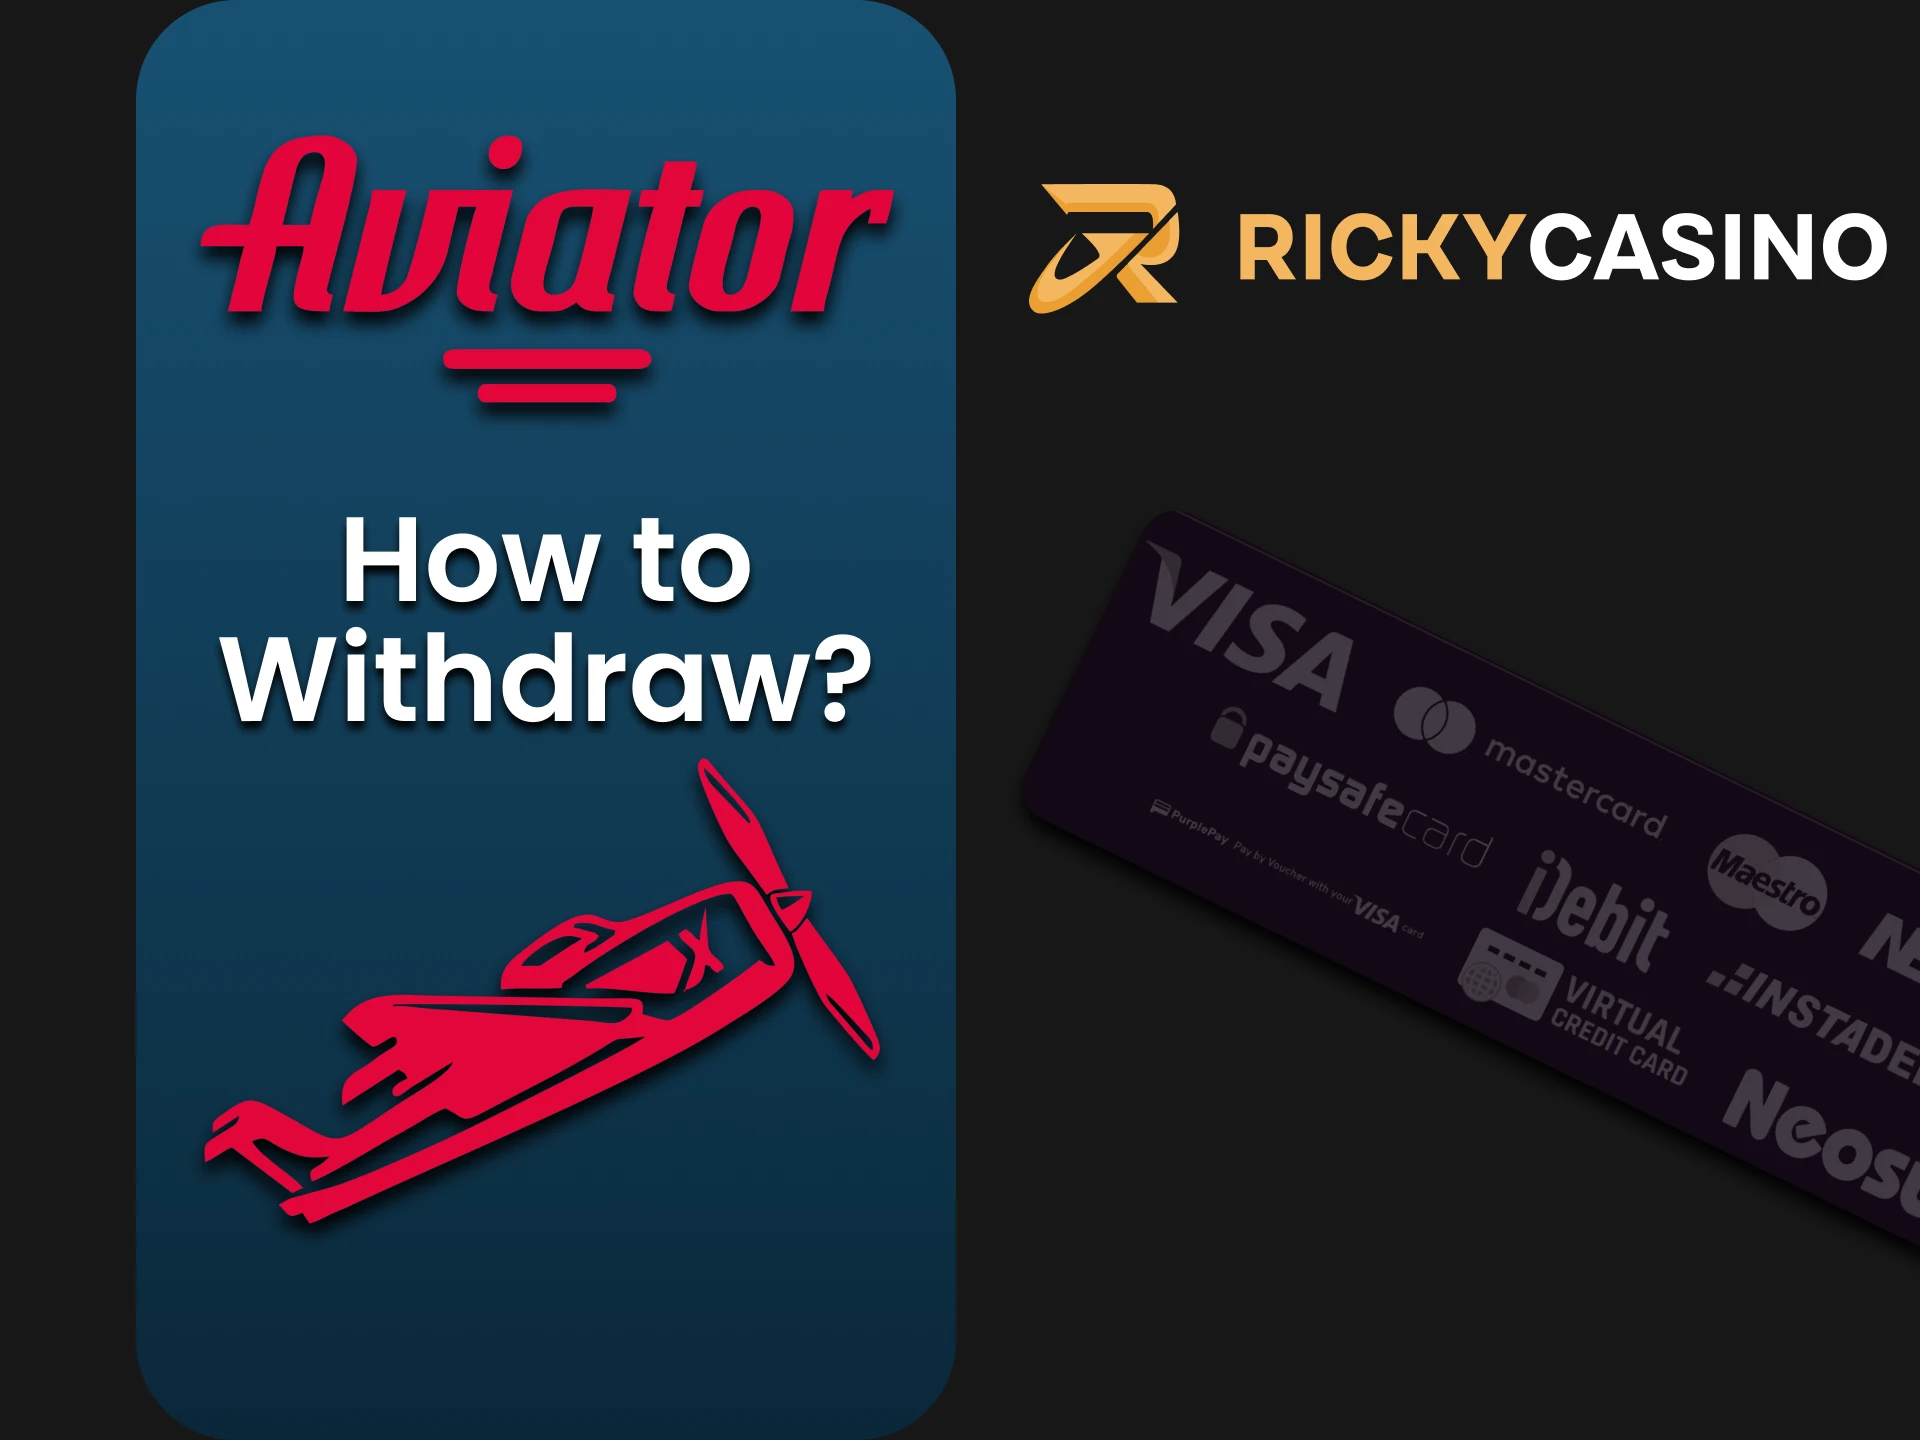 We will tell you how to withdraw funds for the game Aviator at Ricky Casino.